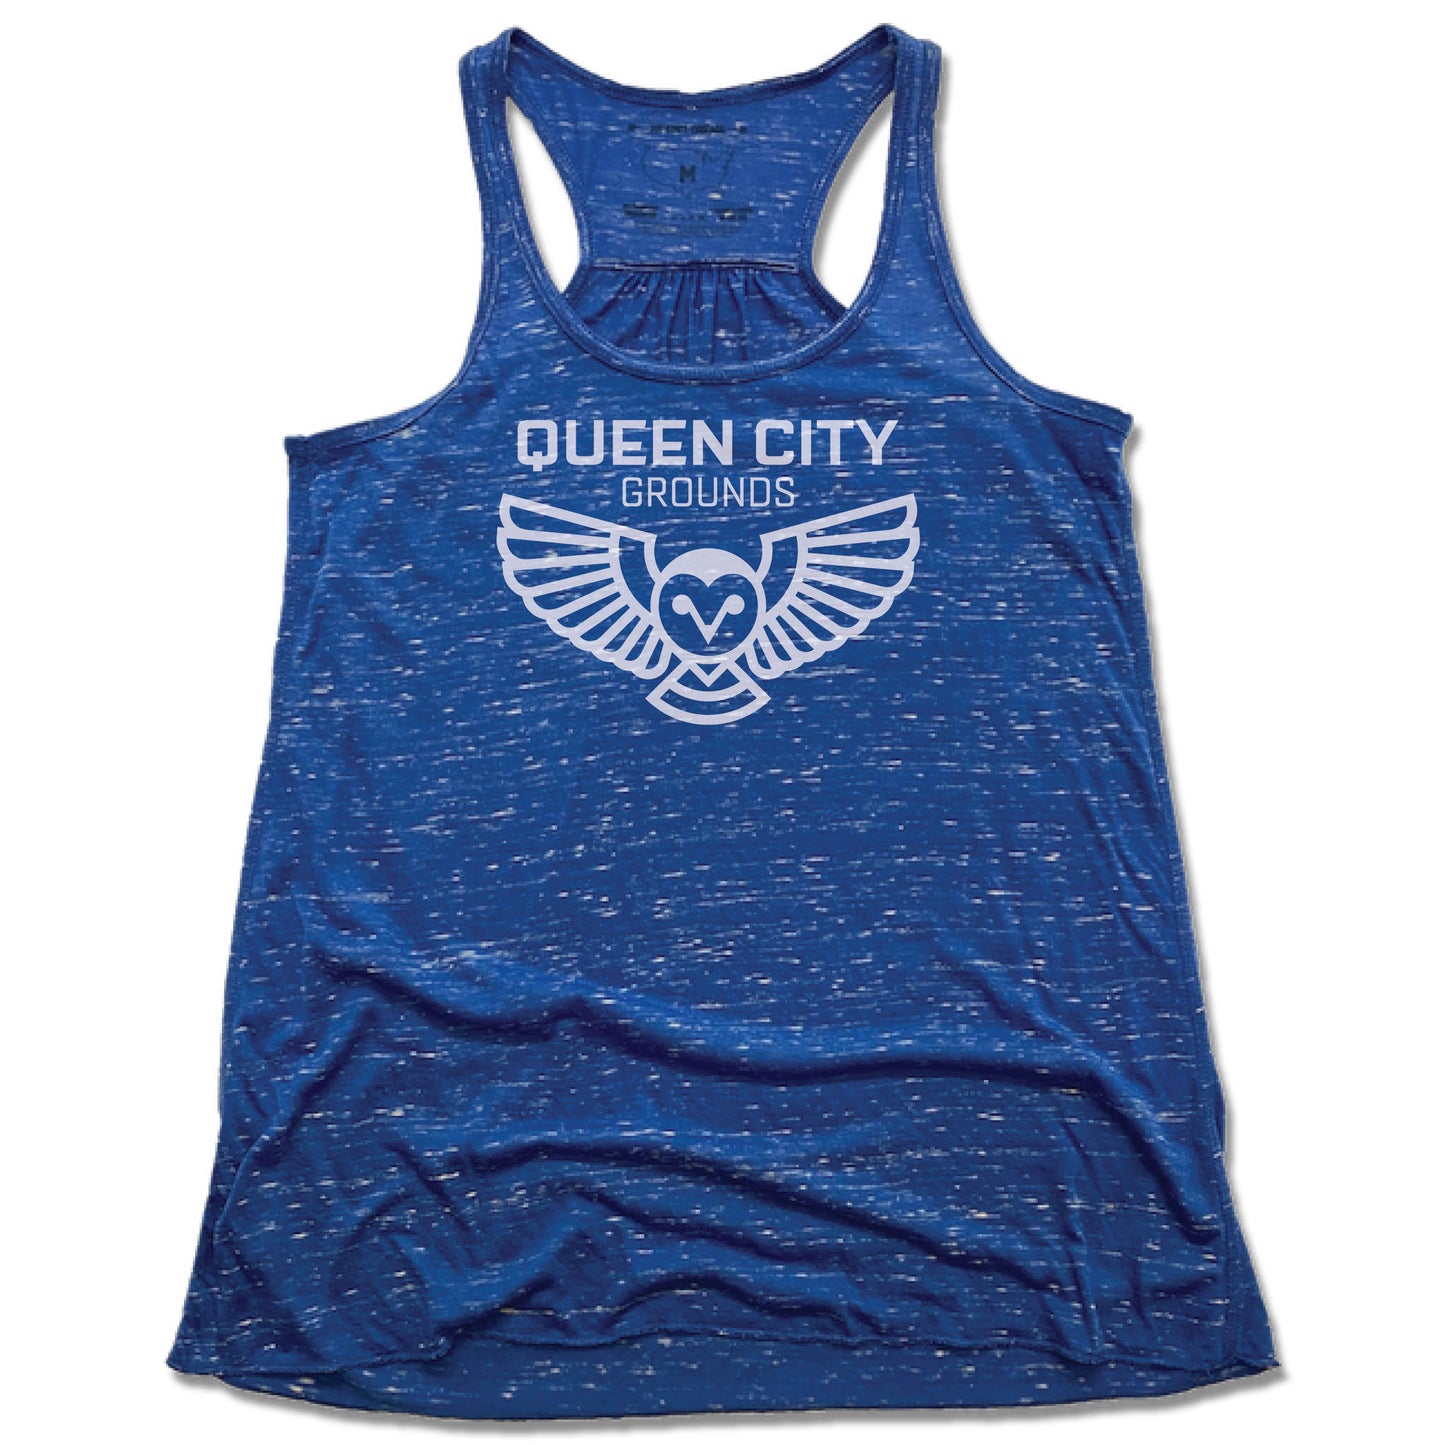 QUEEN CITY GROUNDS | LADIES BLUE FLOWY TANK